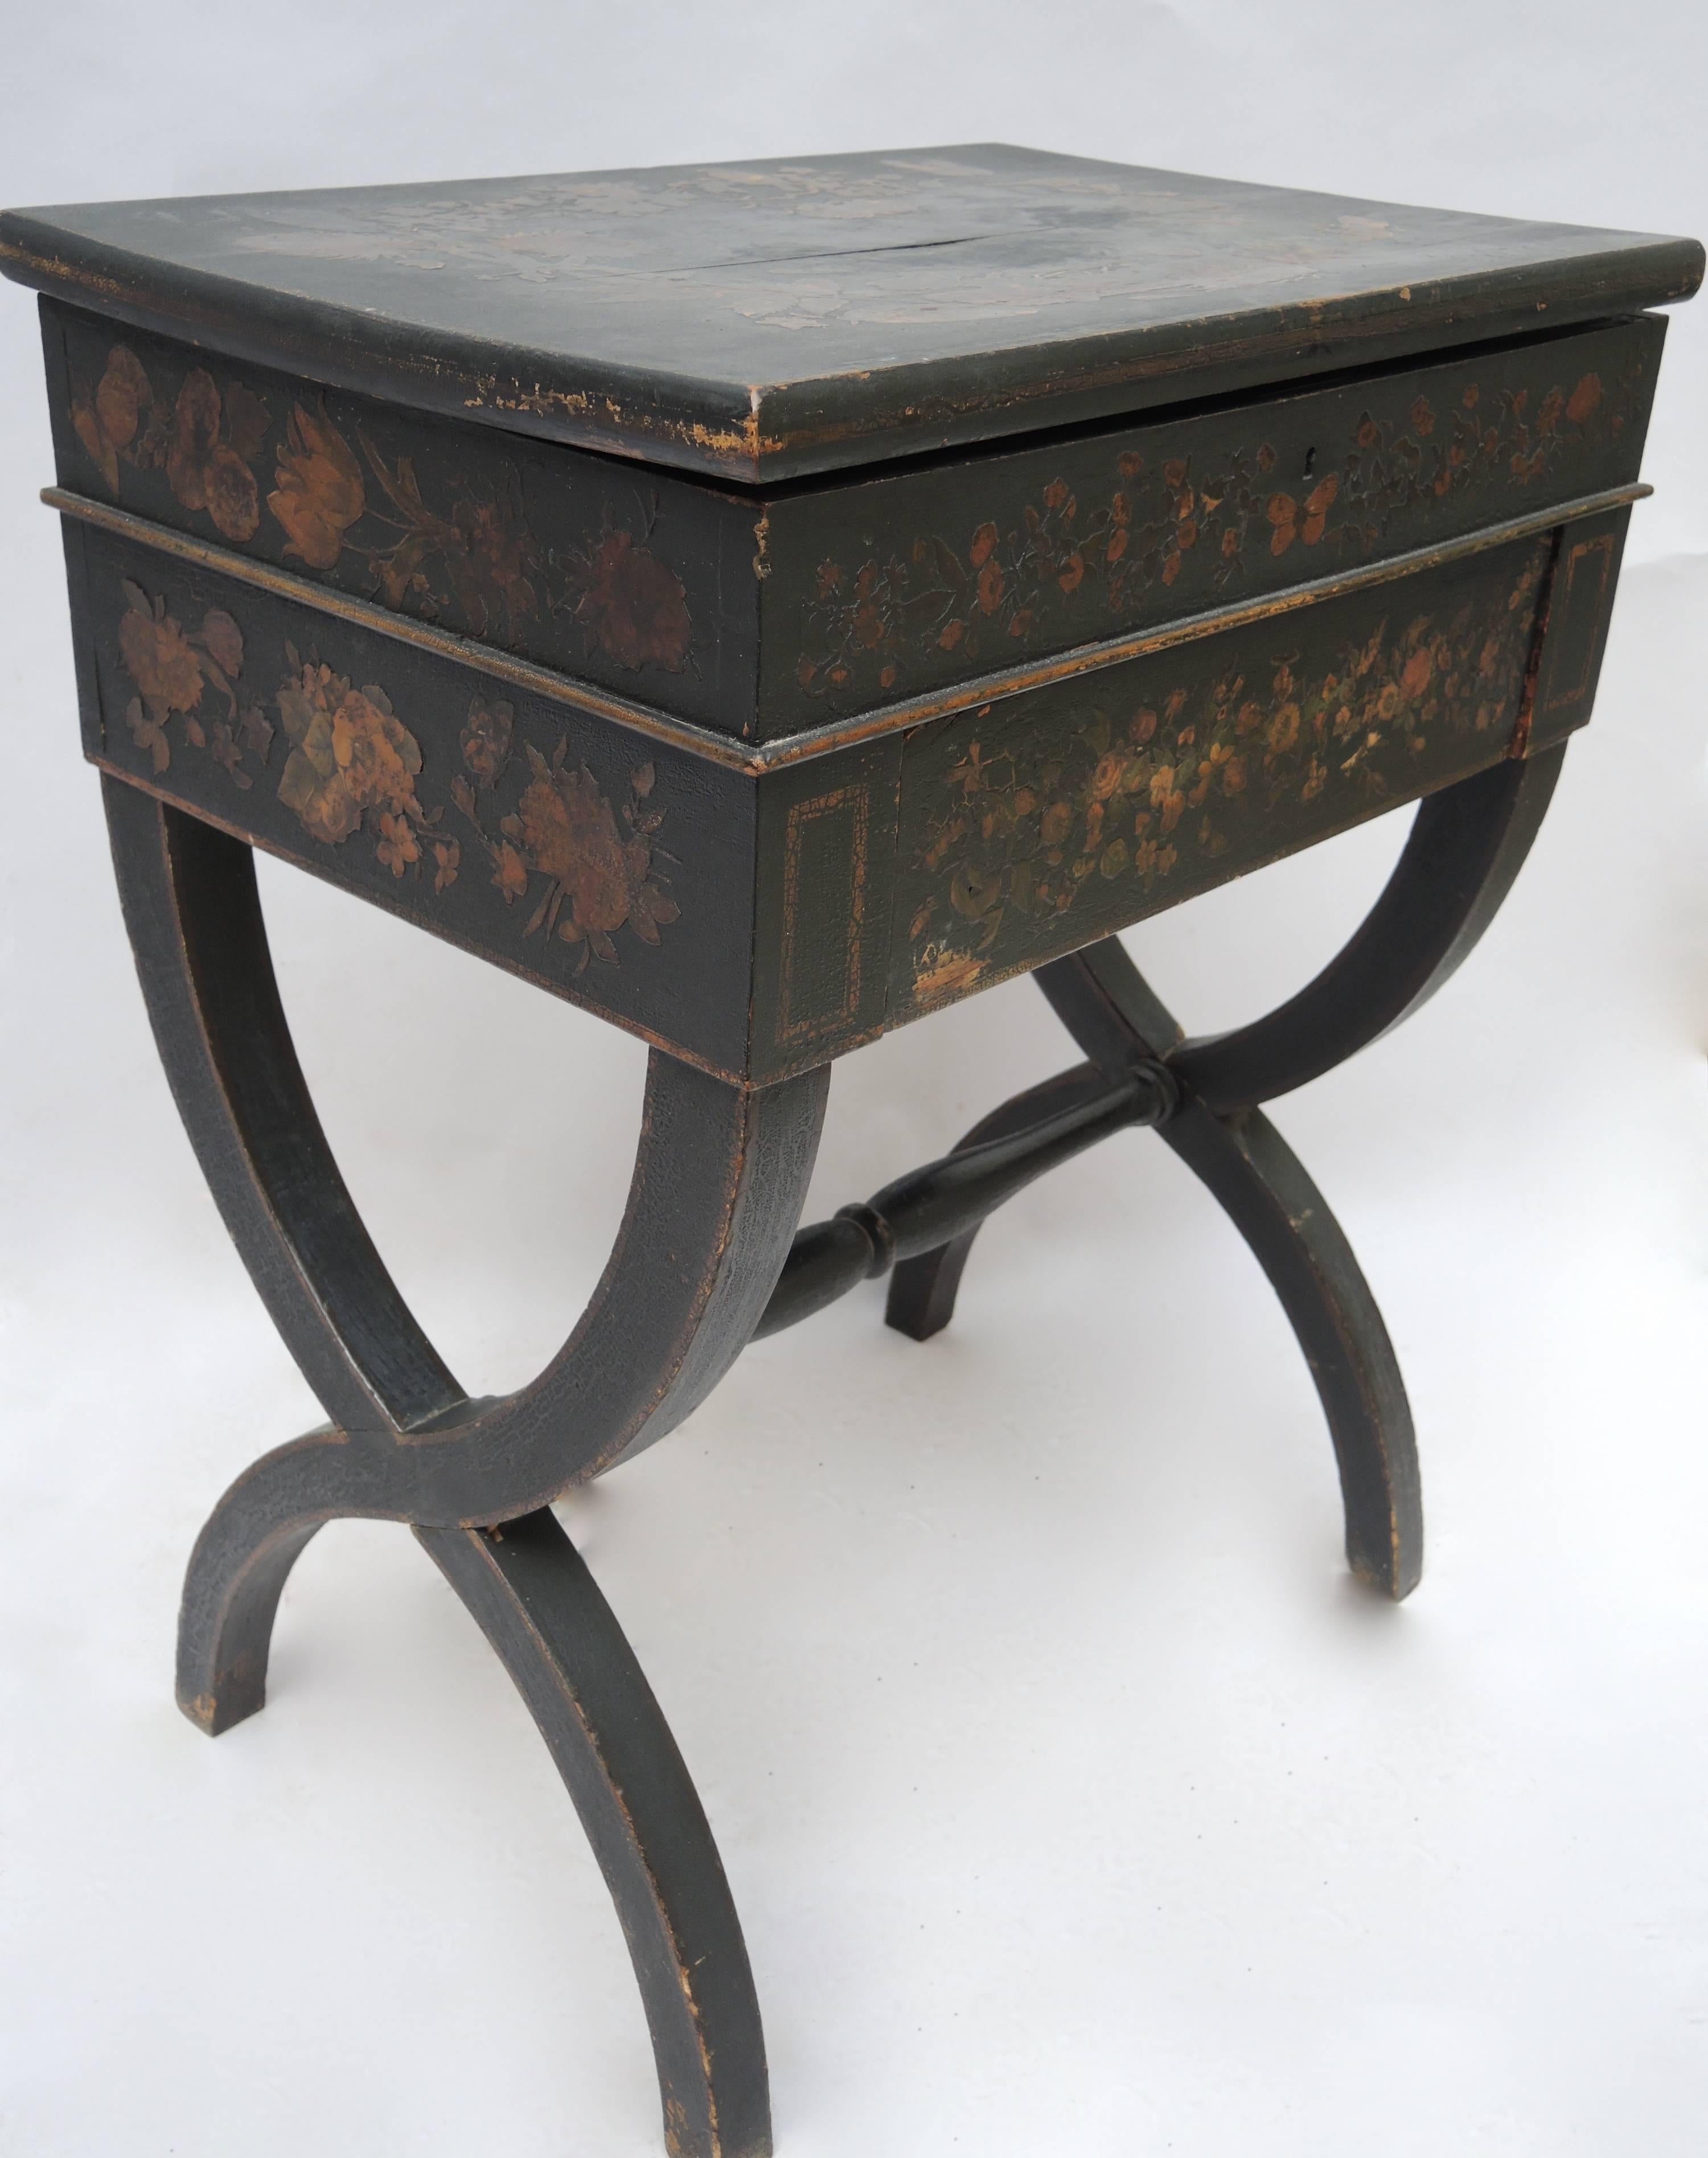 Black English Regency side table or dressing table with applied decoupage decoration of flowers, and insects. The top lifts up to reveal robins egg blue painted interior with two compartments and a mirror. A lovely and versatile table in the